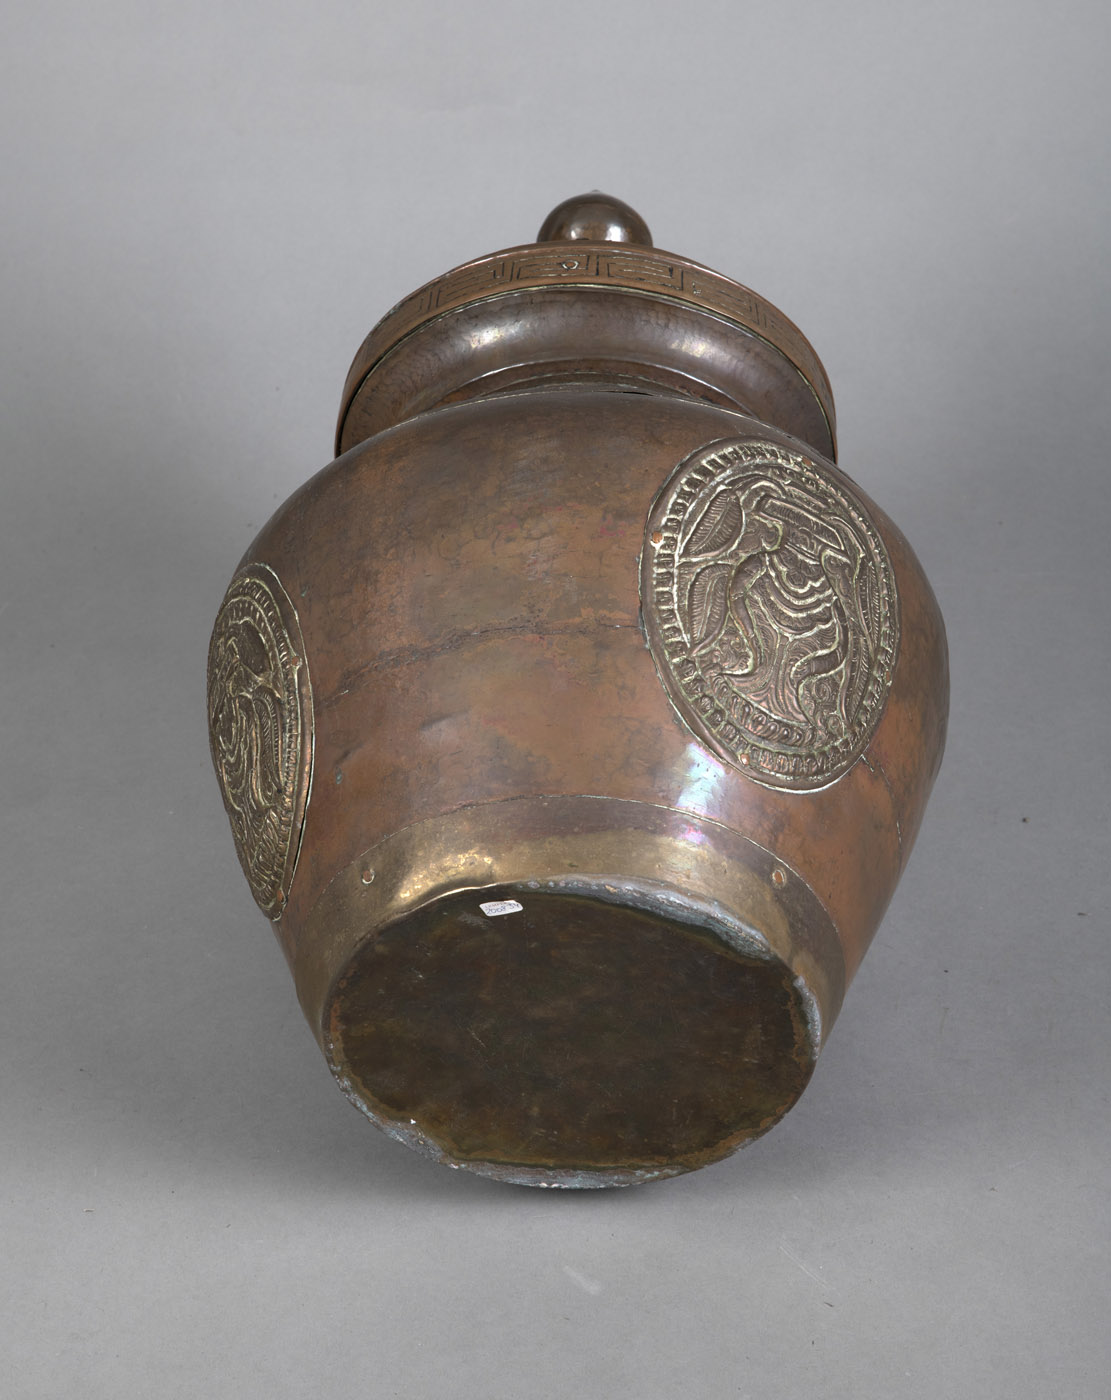 A LARGE EMBOSSED COPPER AND BRASS STORAGE VESSEL WITH SURROUNDING SWASTIKA AND "SHOU" CHARACTER DEC - Image 4 of 4